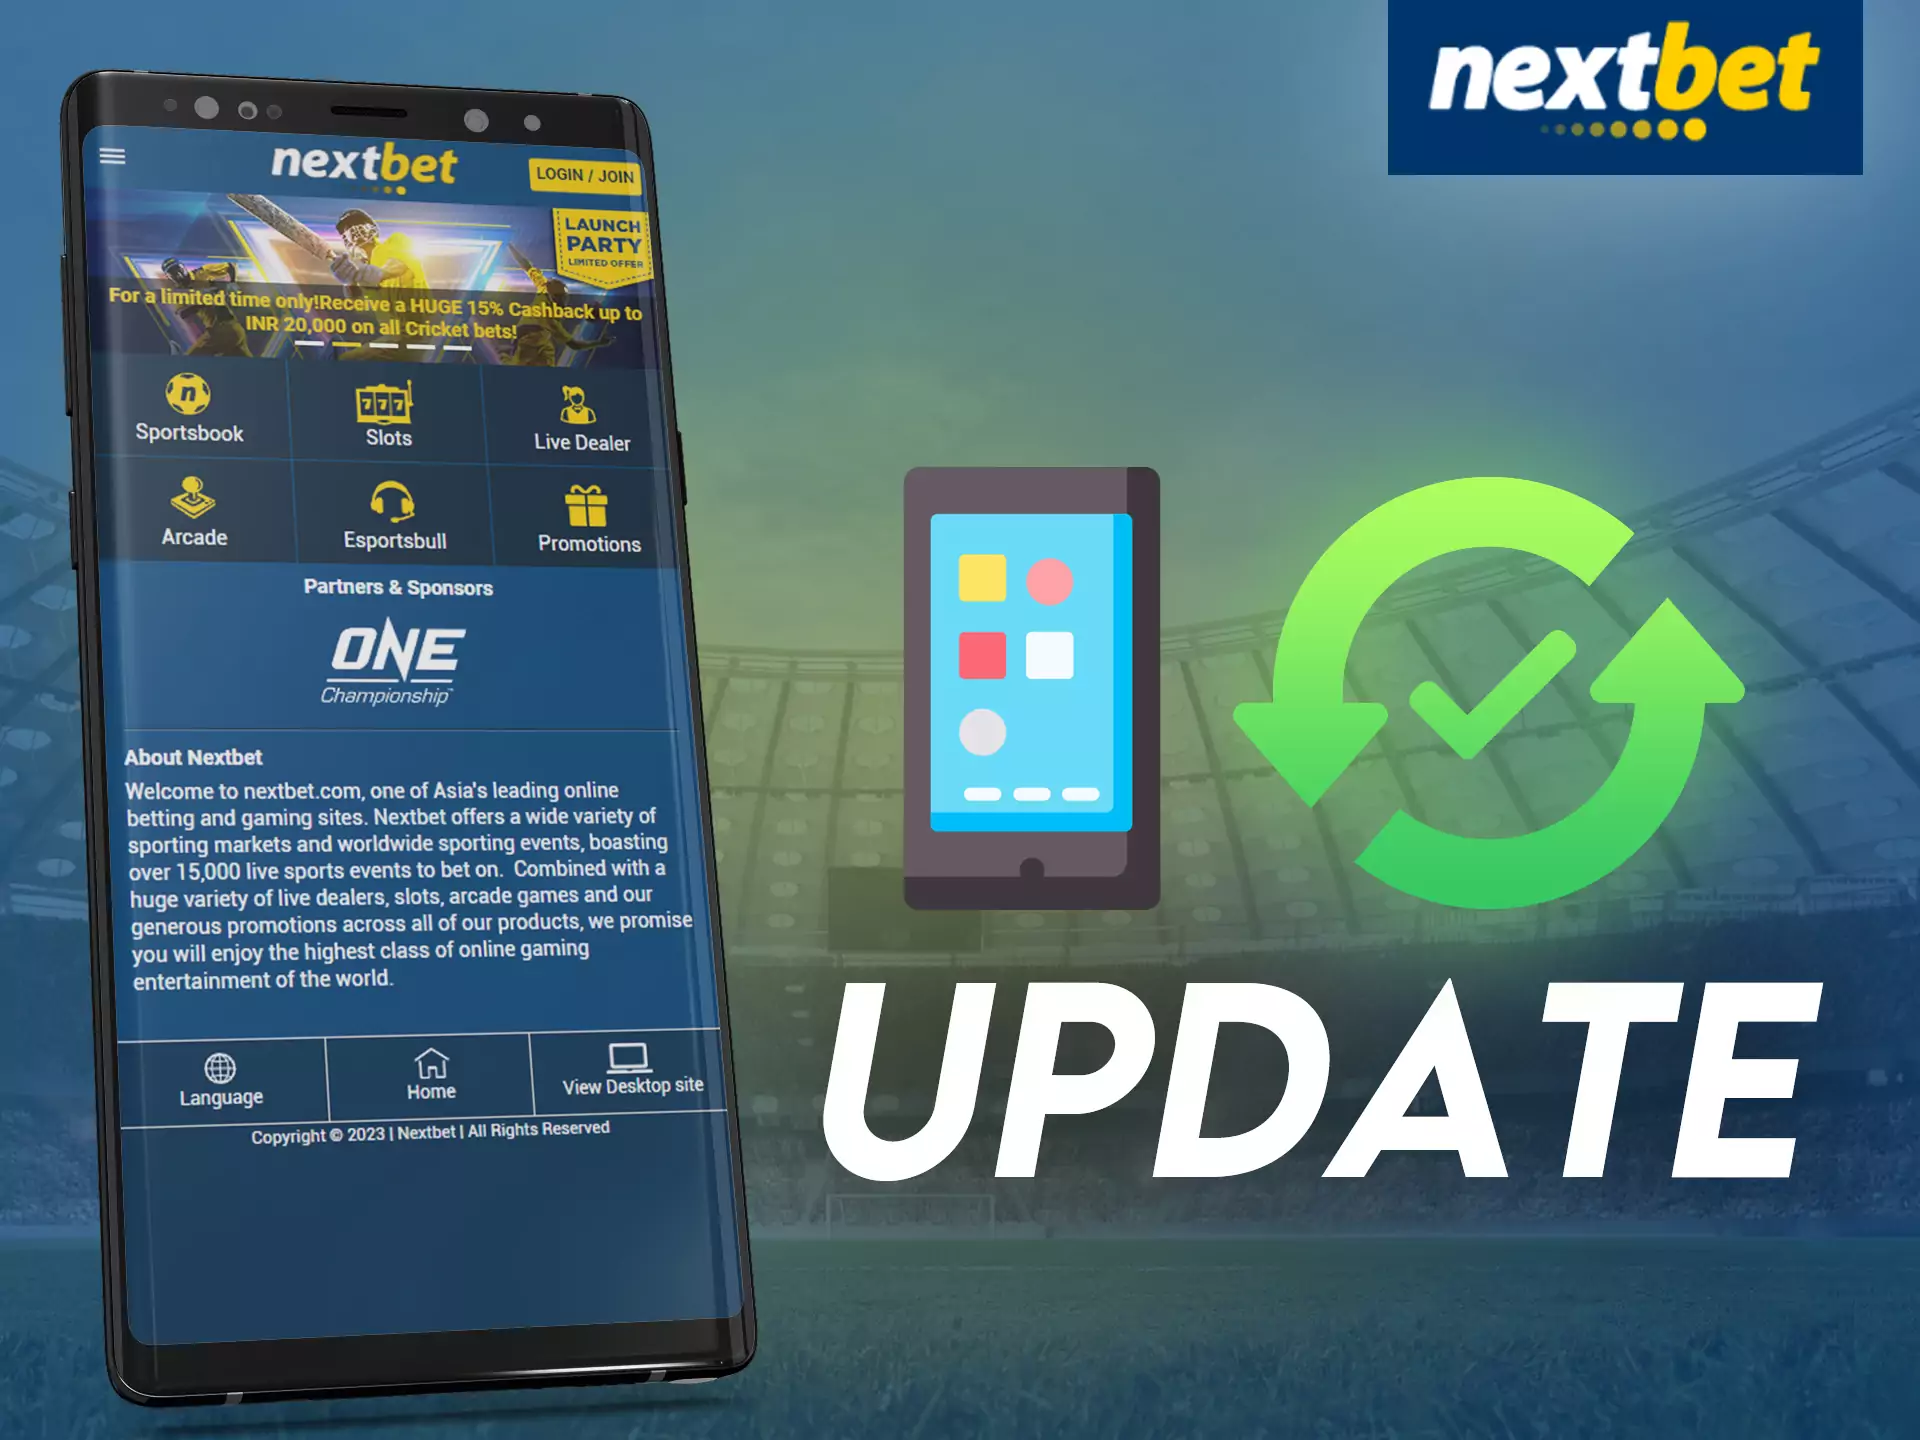 Don't forget to update the Nextbet app and stay up to date with the news and get new bonuses.